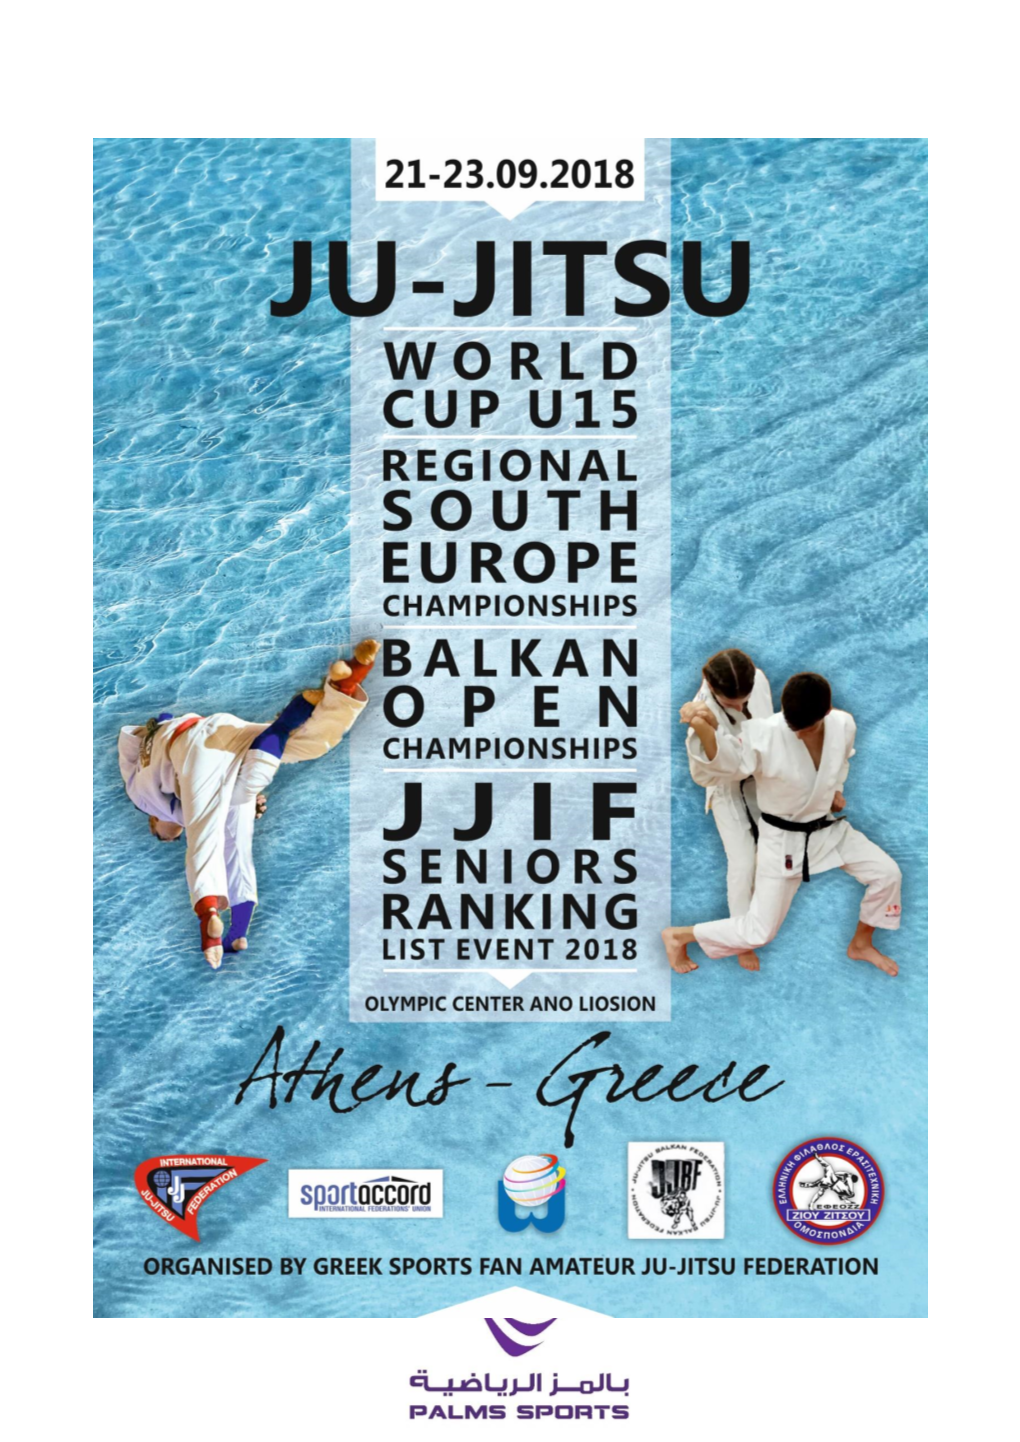 First Invitation for the BALKAN OPEN CHAMPIONSHIP Which Will Take Place in ATHENS-GREECE